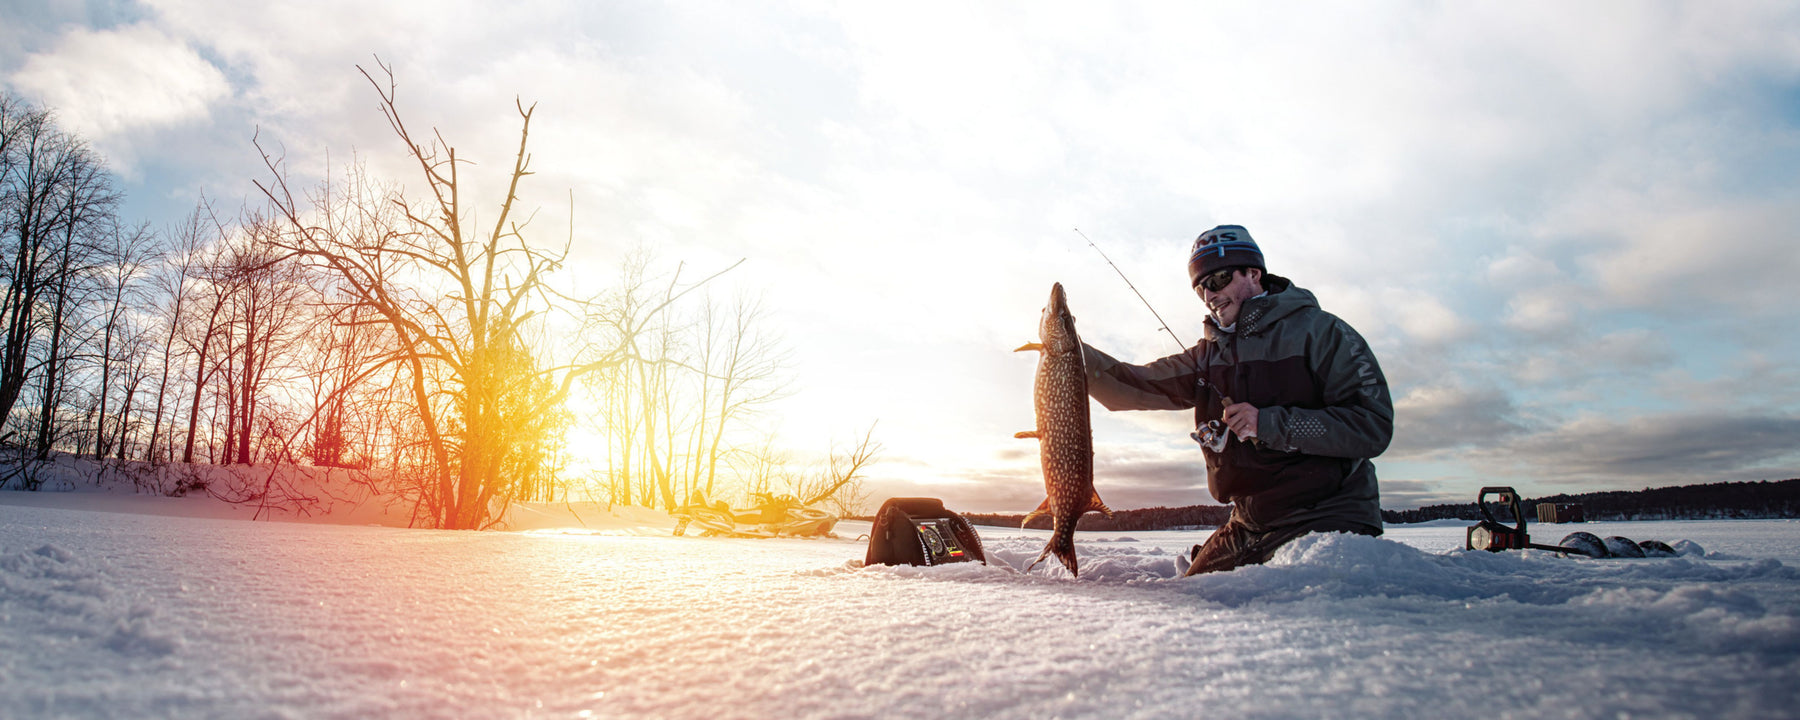 Comment pêcher le brochet en hiver?||How to catch a pike during winter?